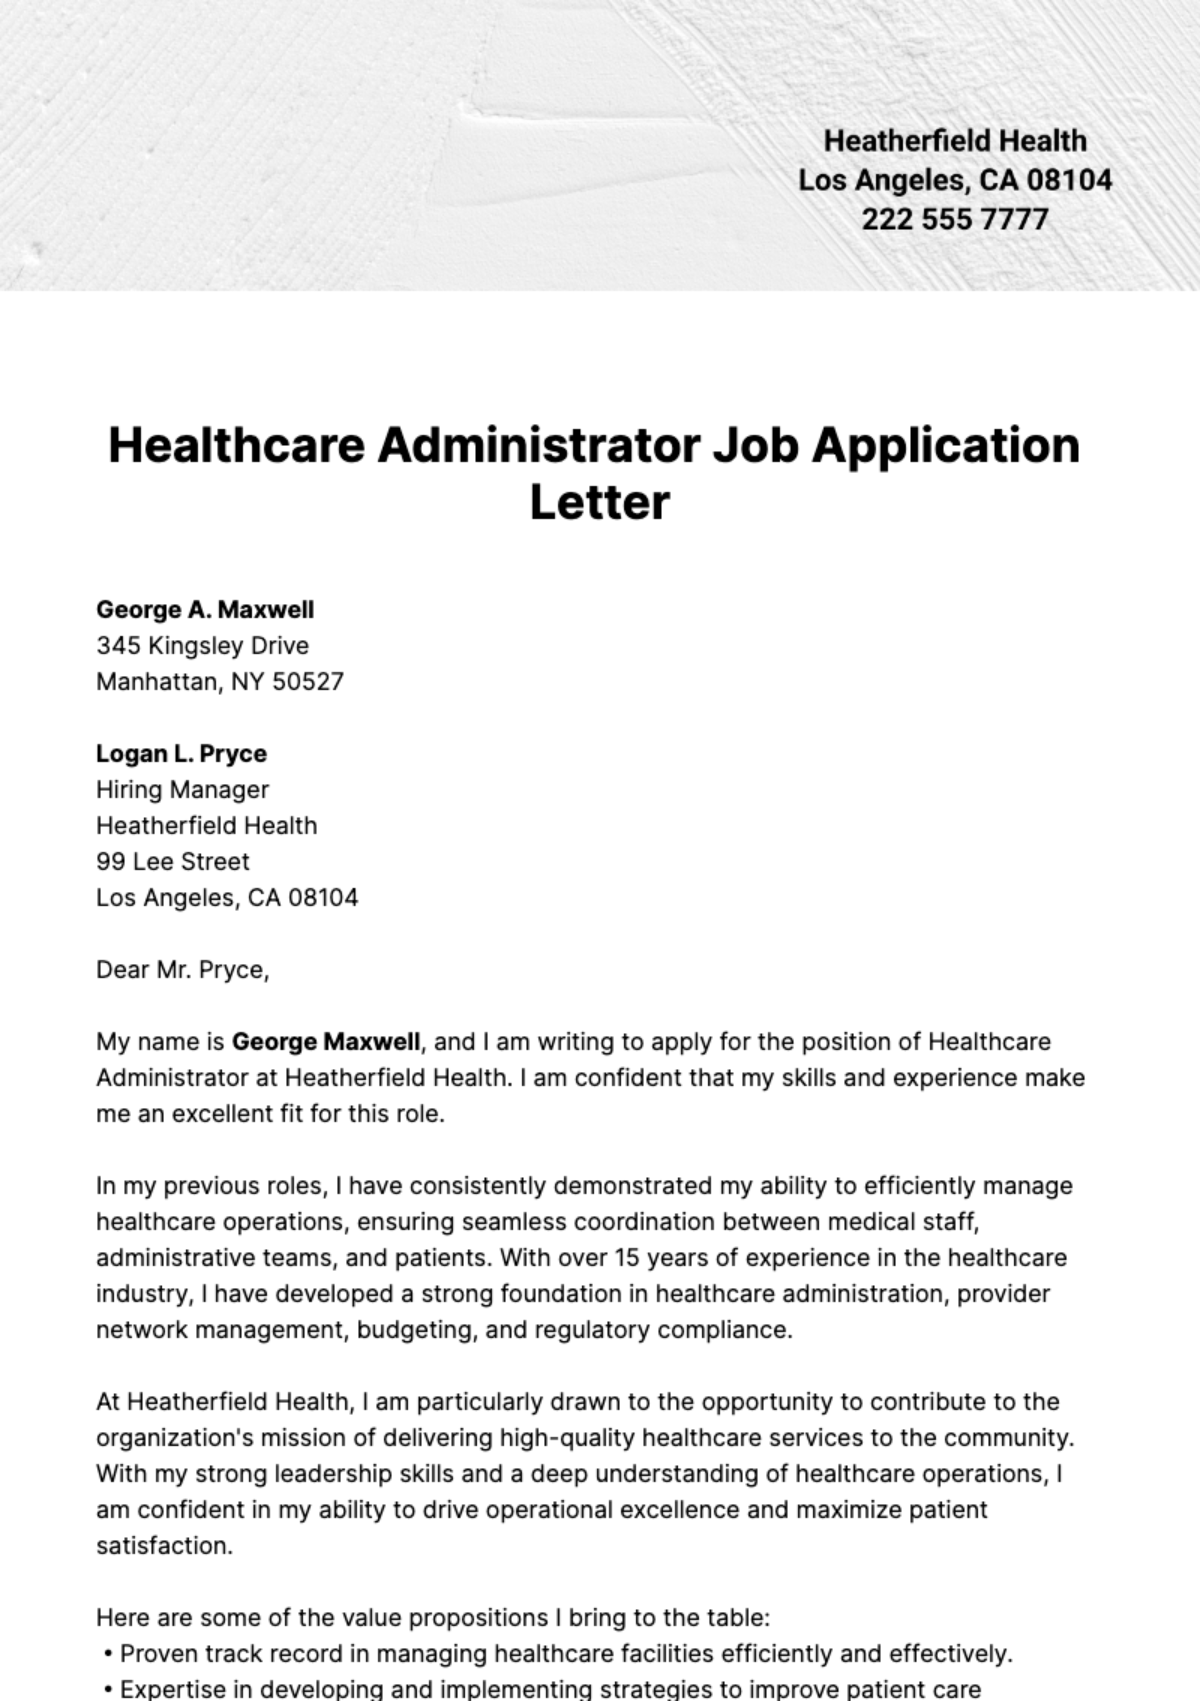 Free Healthcare Administrator Job Application Letter  Template